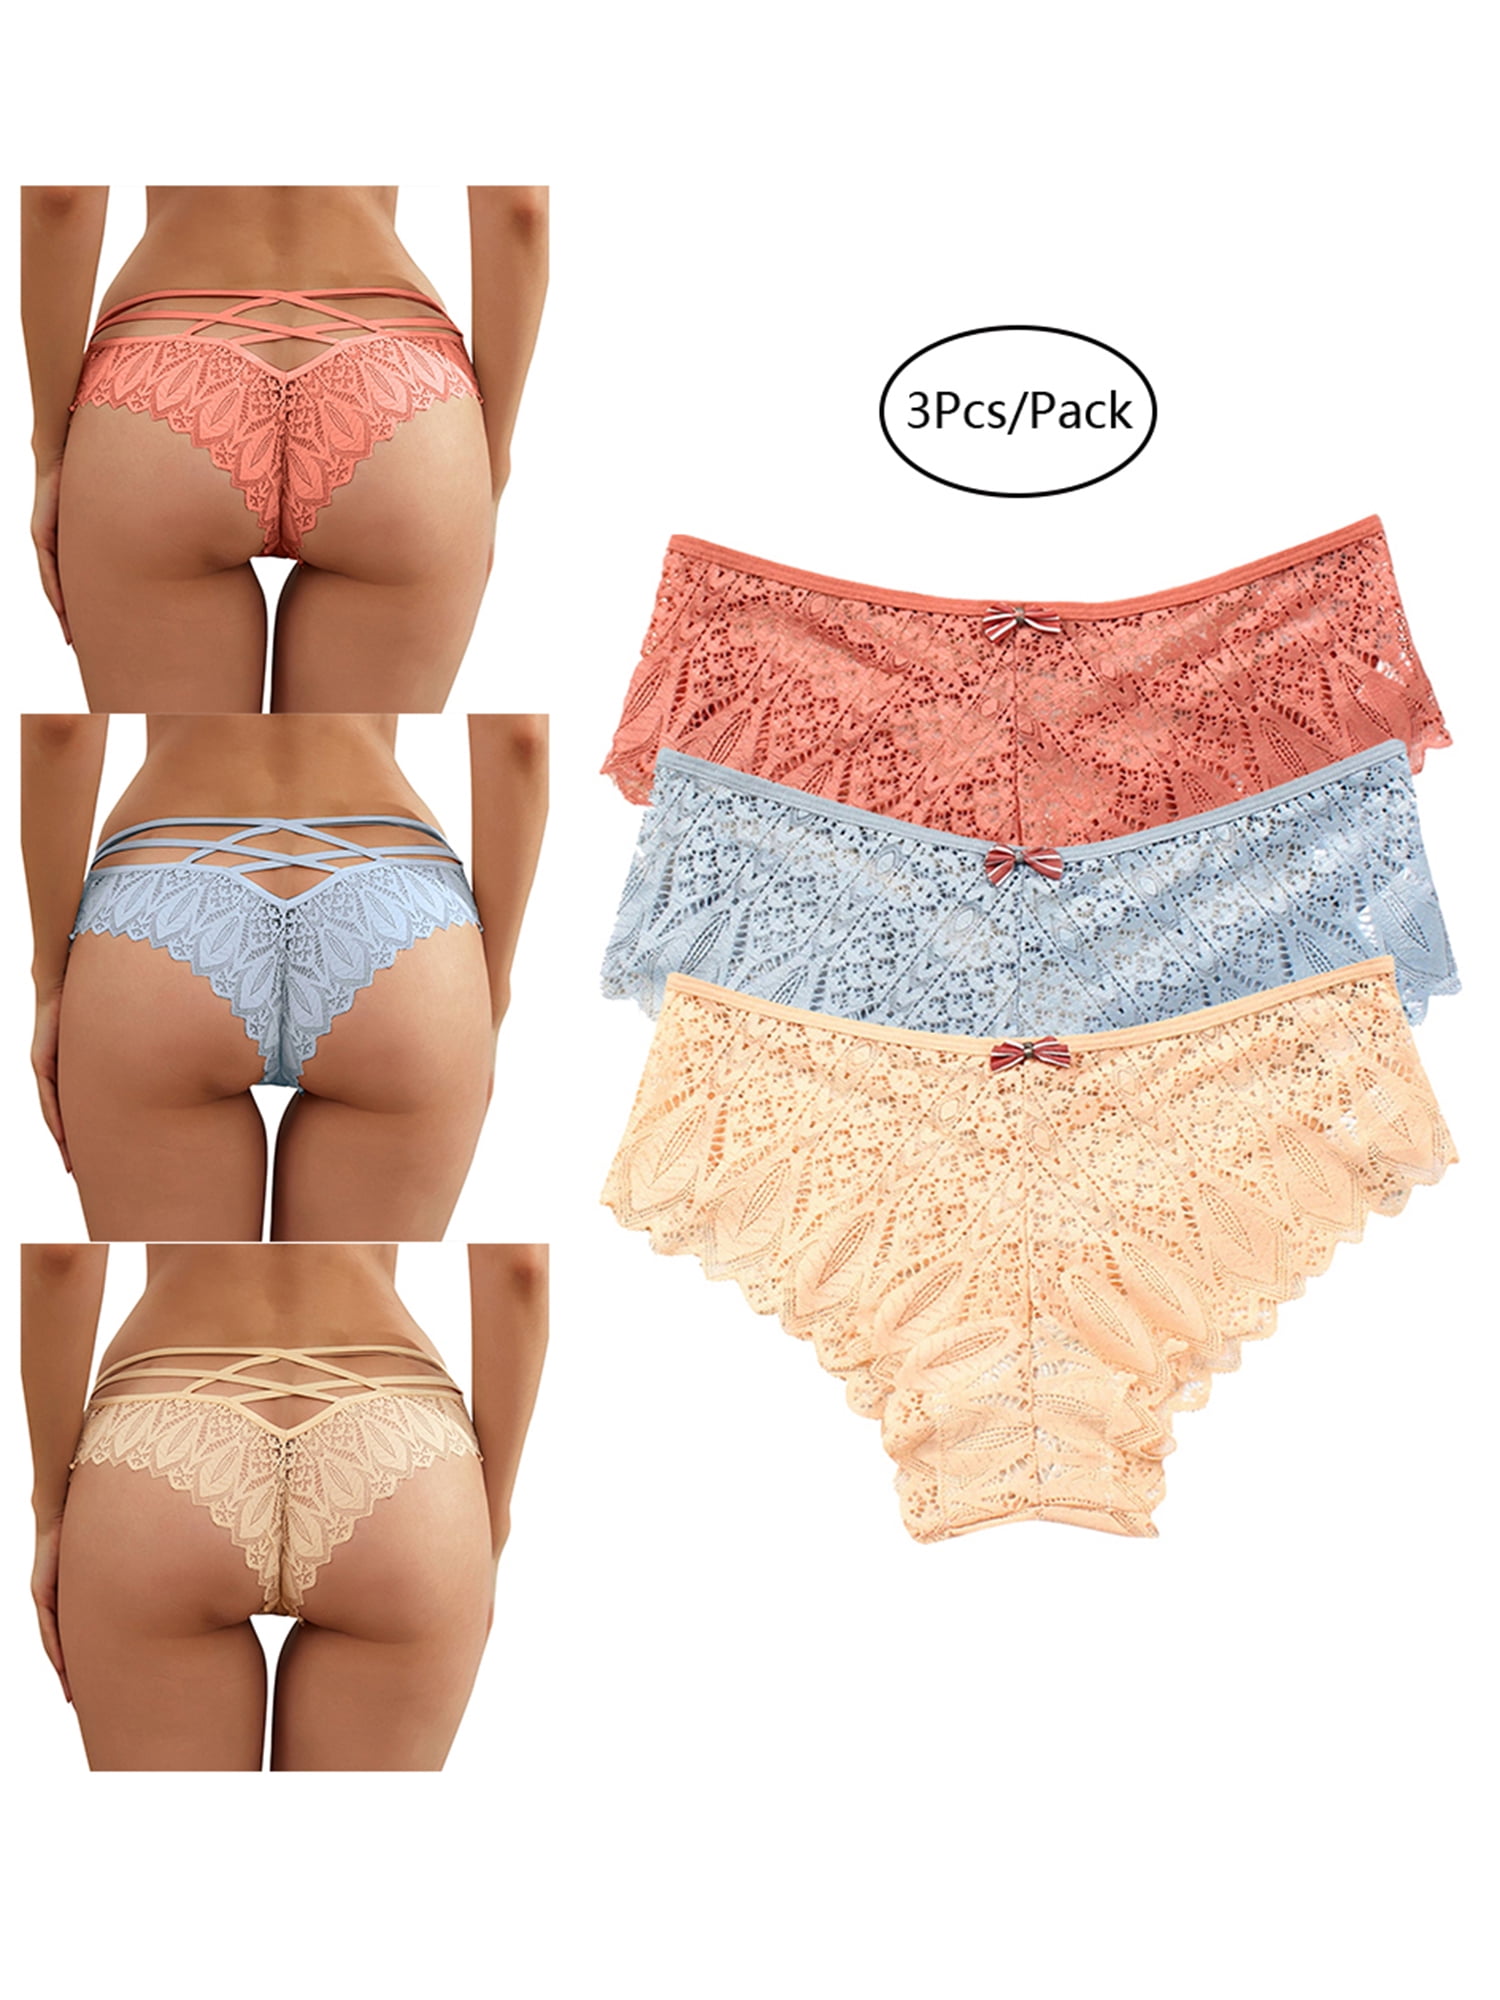 Yolossia Plus Size S-5XL Womens Sexy Lace French Knickers Lingerie Thong  Briefs Panties Underwear 